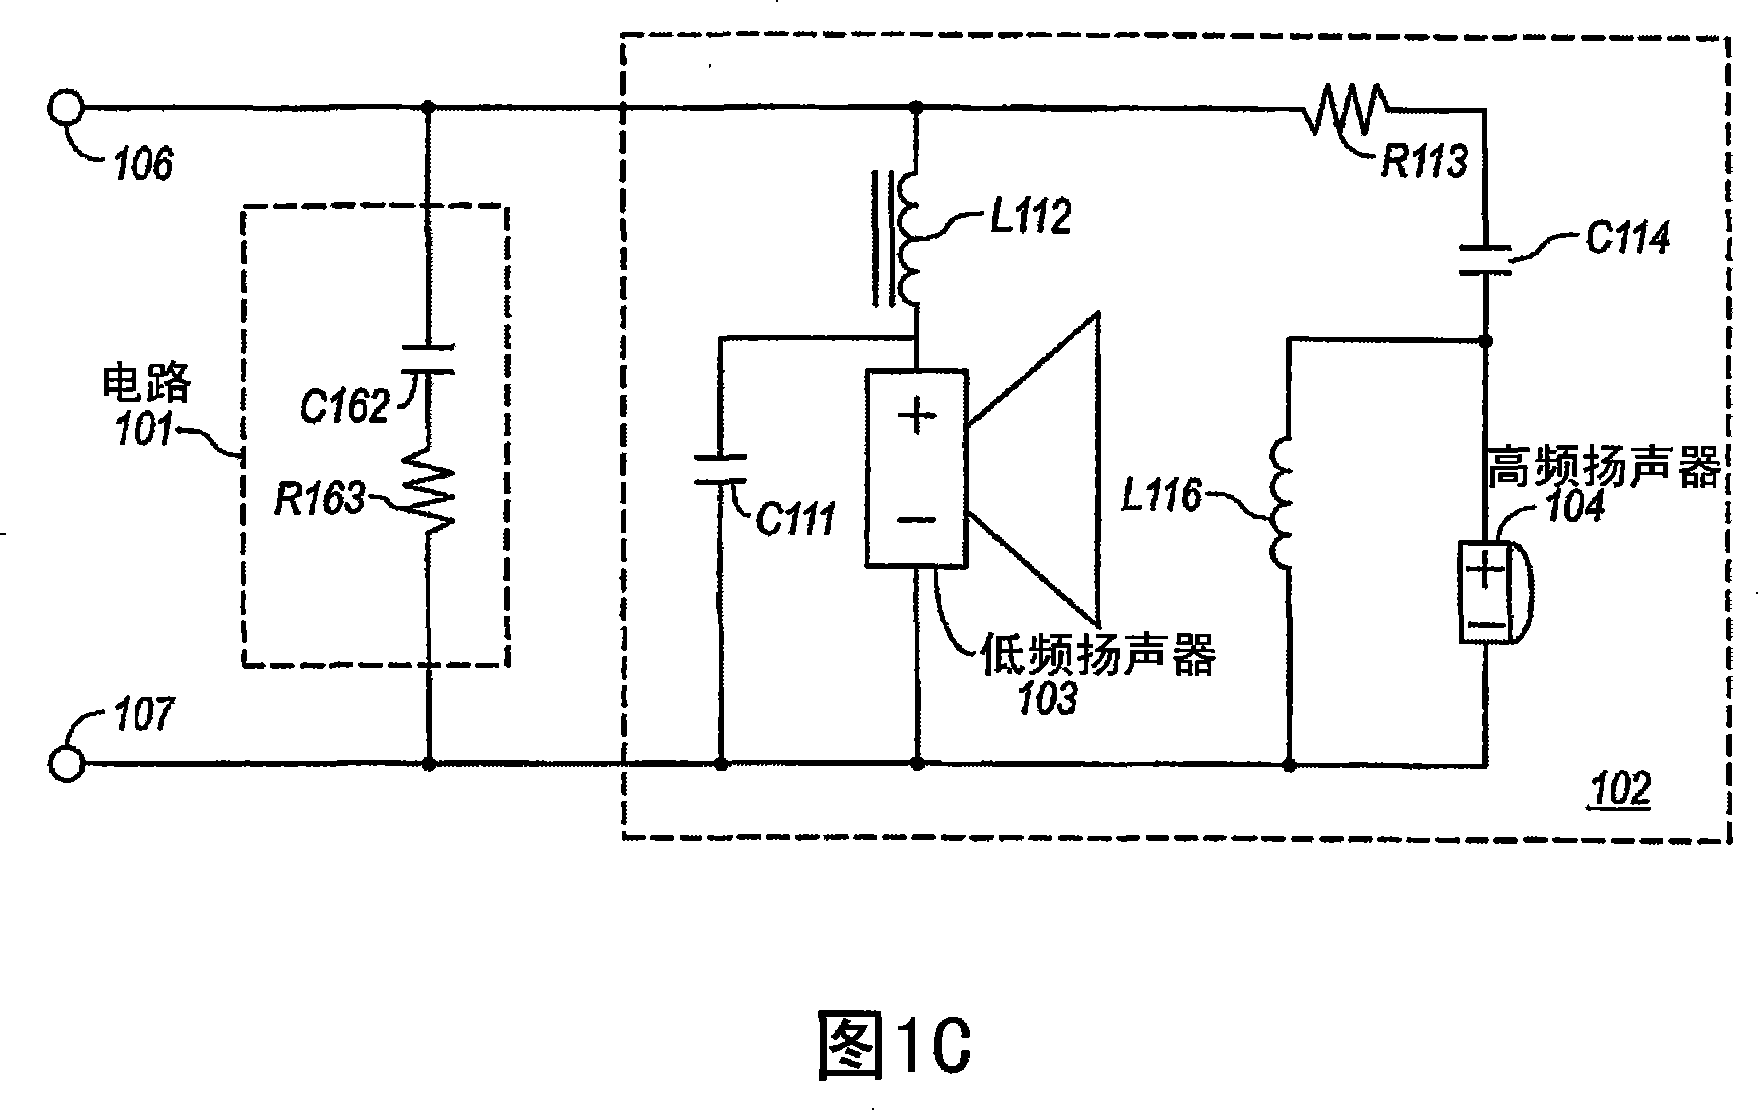 Crossover circuit for reducing impedance response variance of a speaker